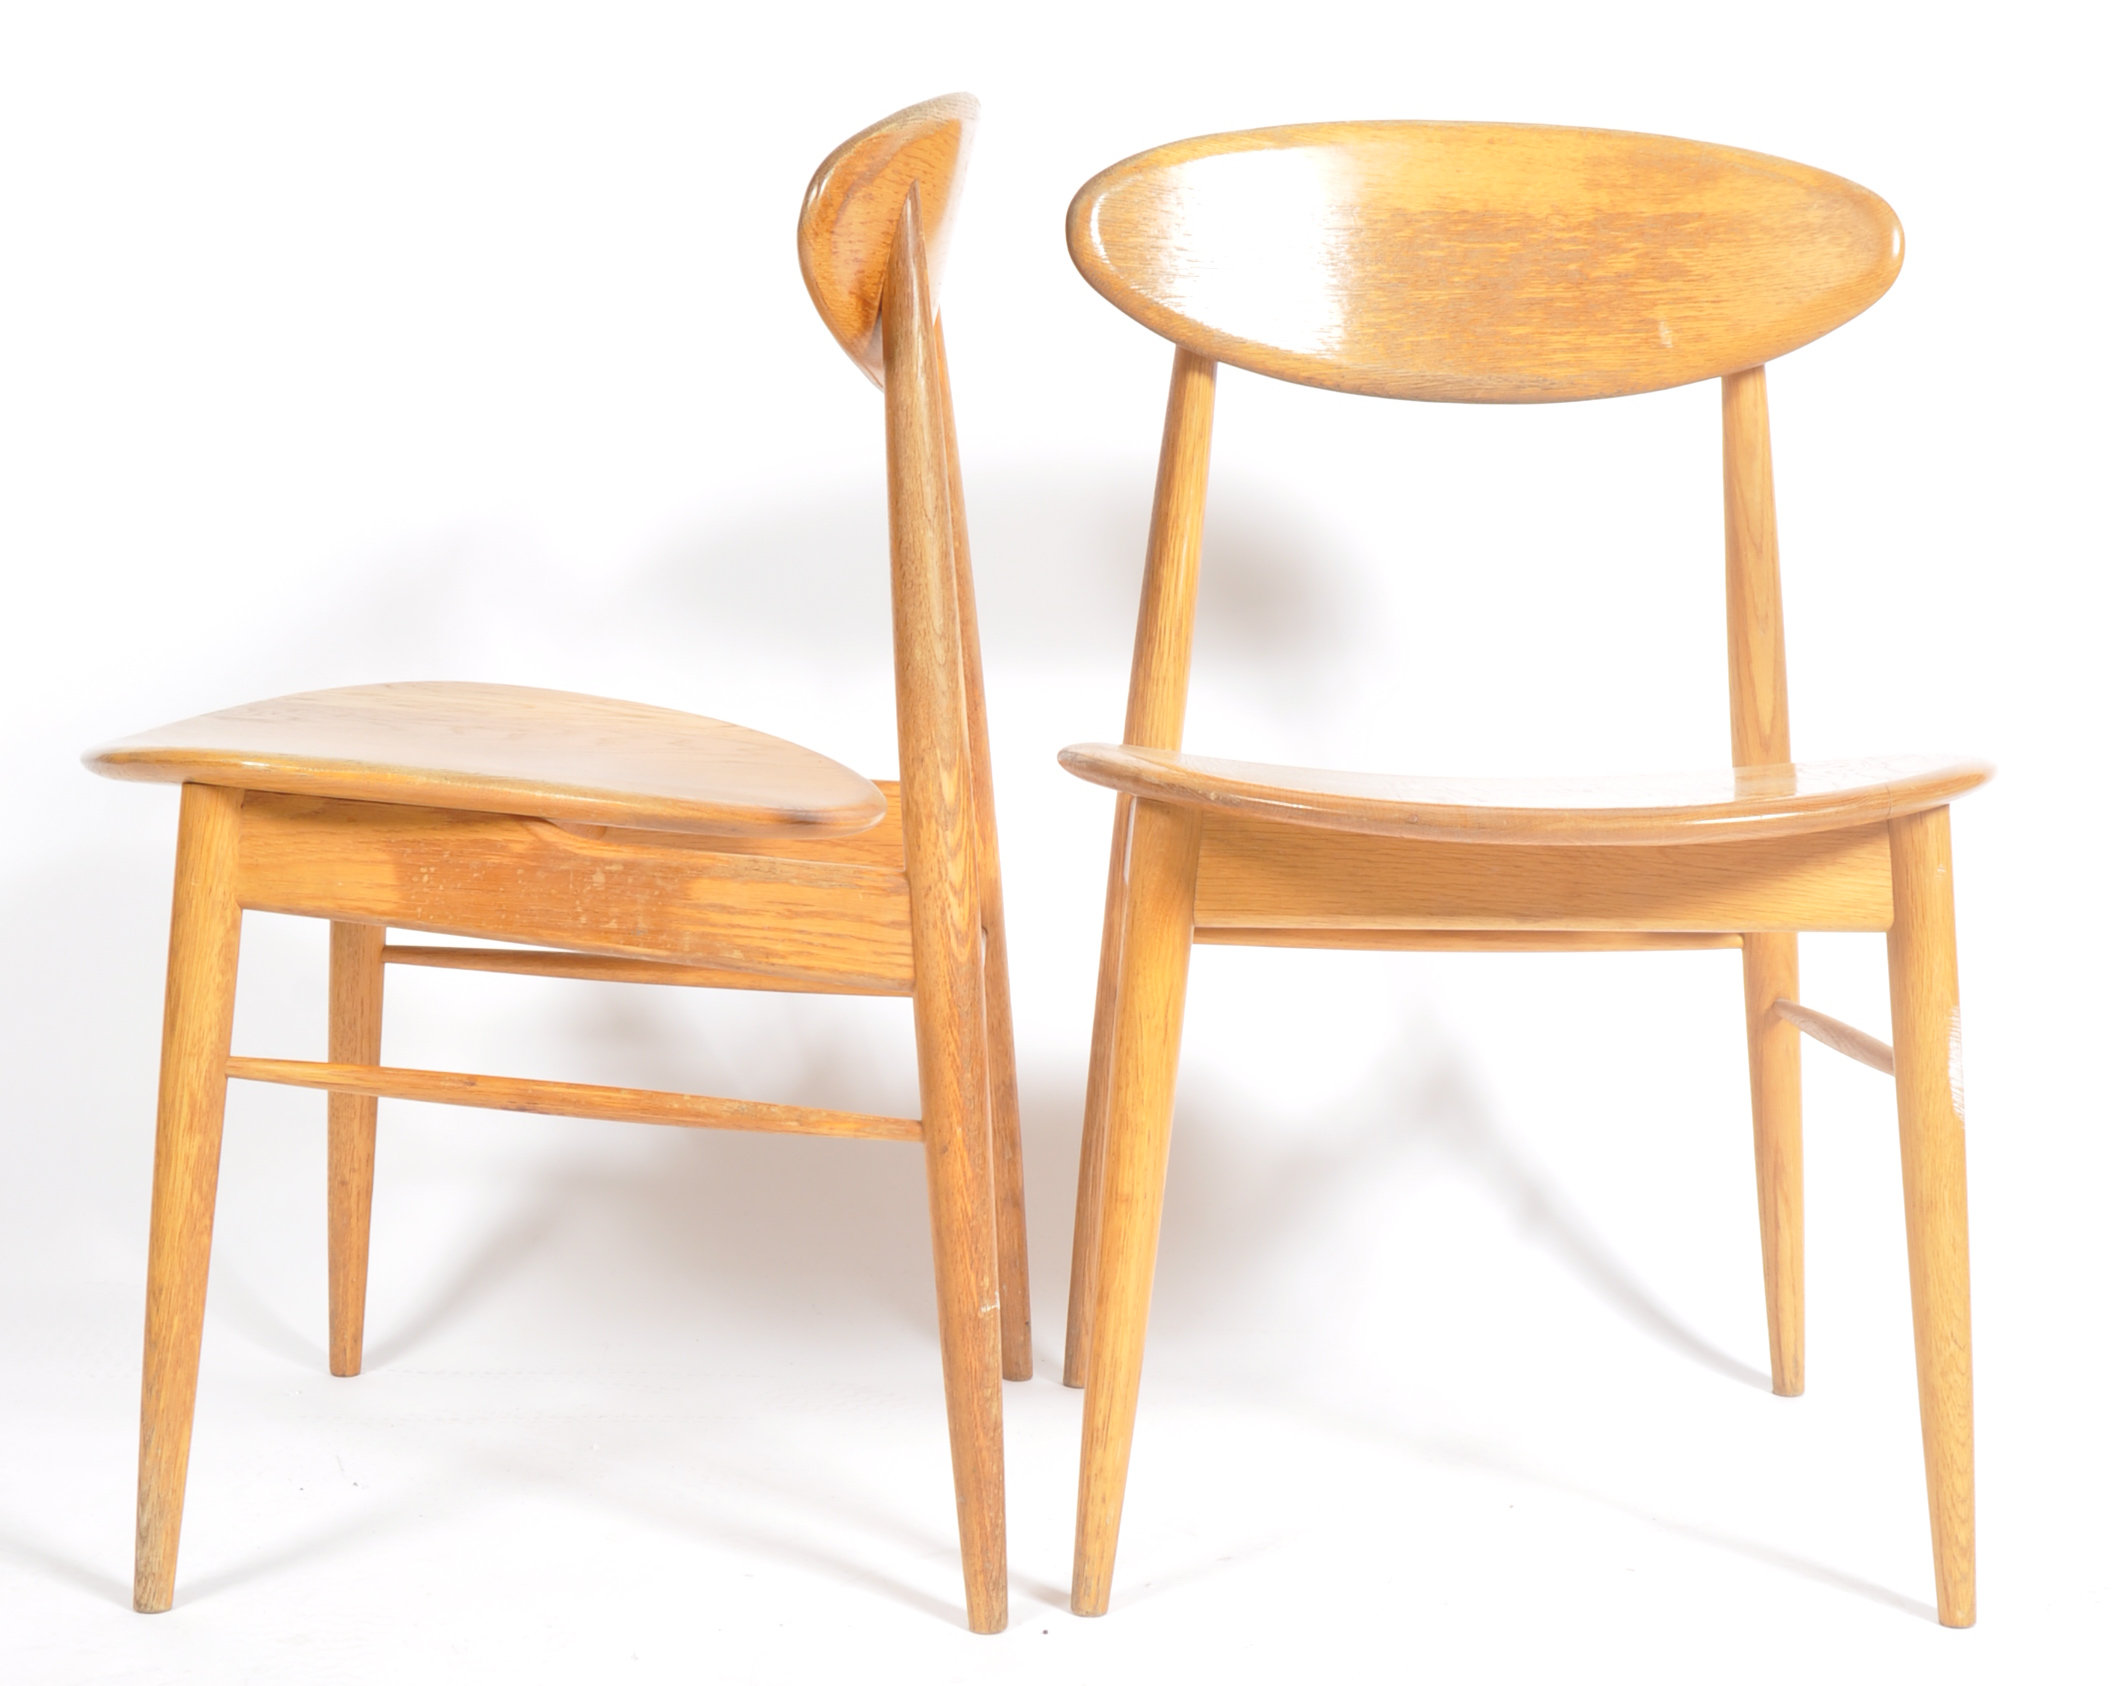 SET OF FOUR RETRO ELM DINING CHAIRS / SIDE CHAIRS - Image 7 of 8